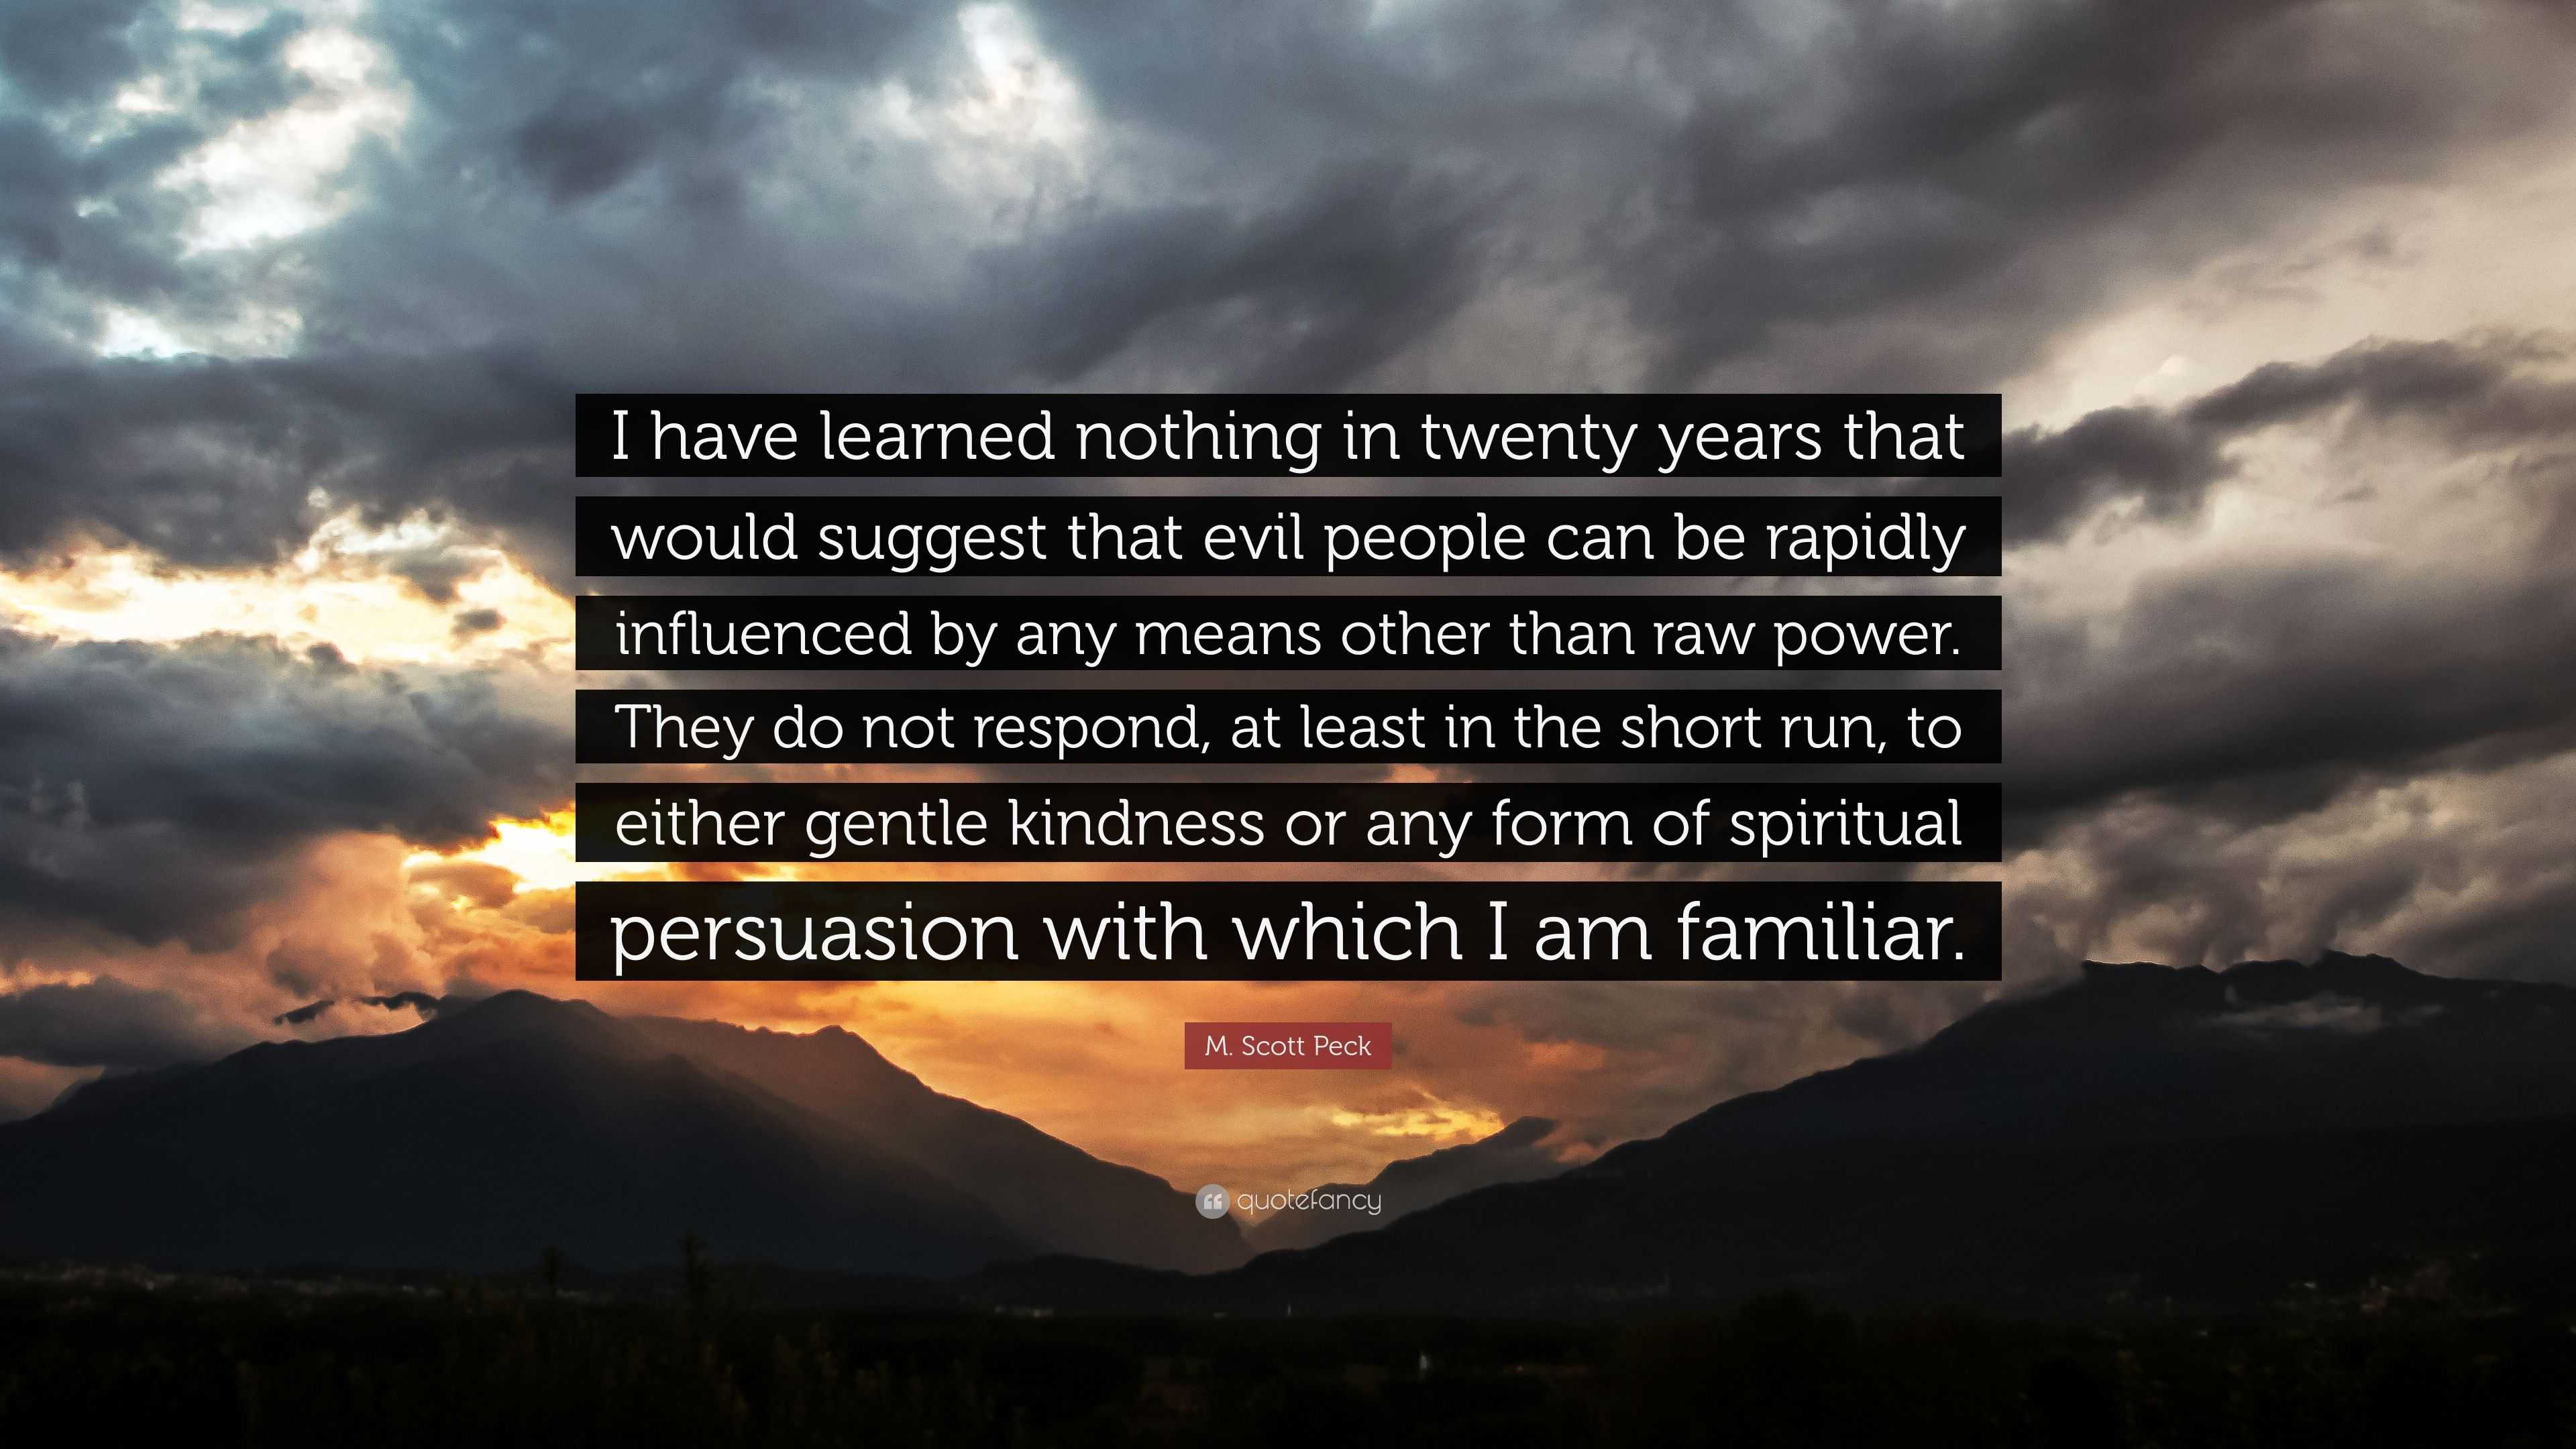 https://quotefancy.com/media/wallpaper/3840x2160/4874988-M-Scott-Peck-Quote-I-have-learned-nothing-in-twenty-years-that.jpg